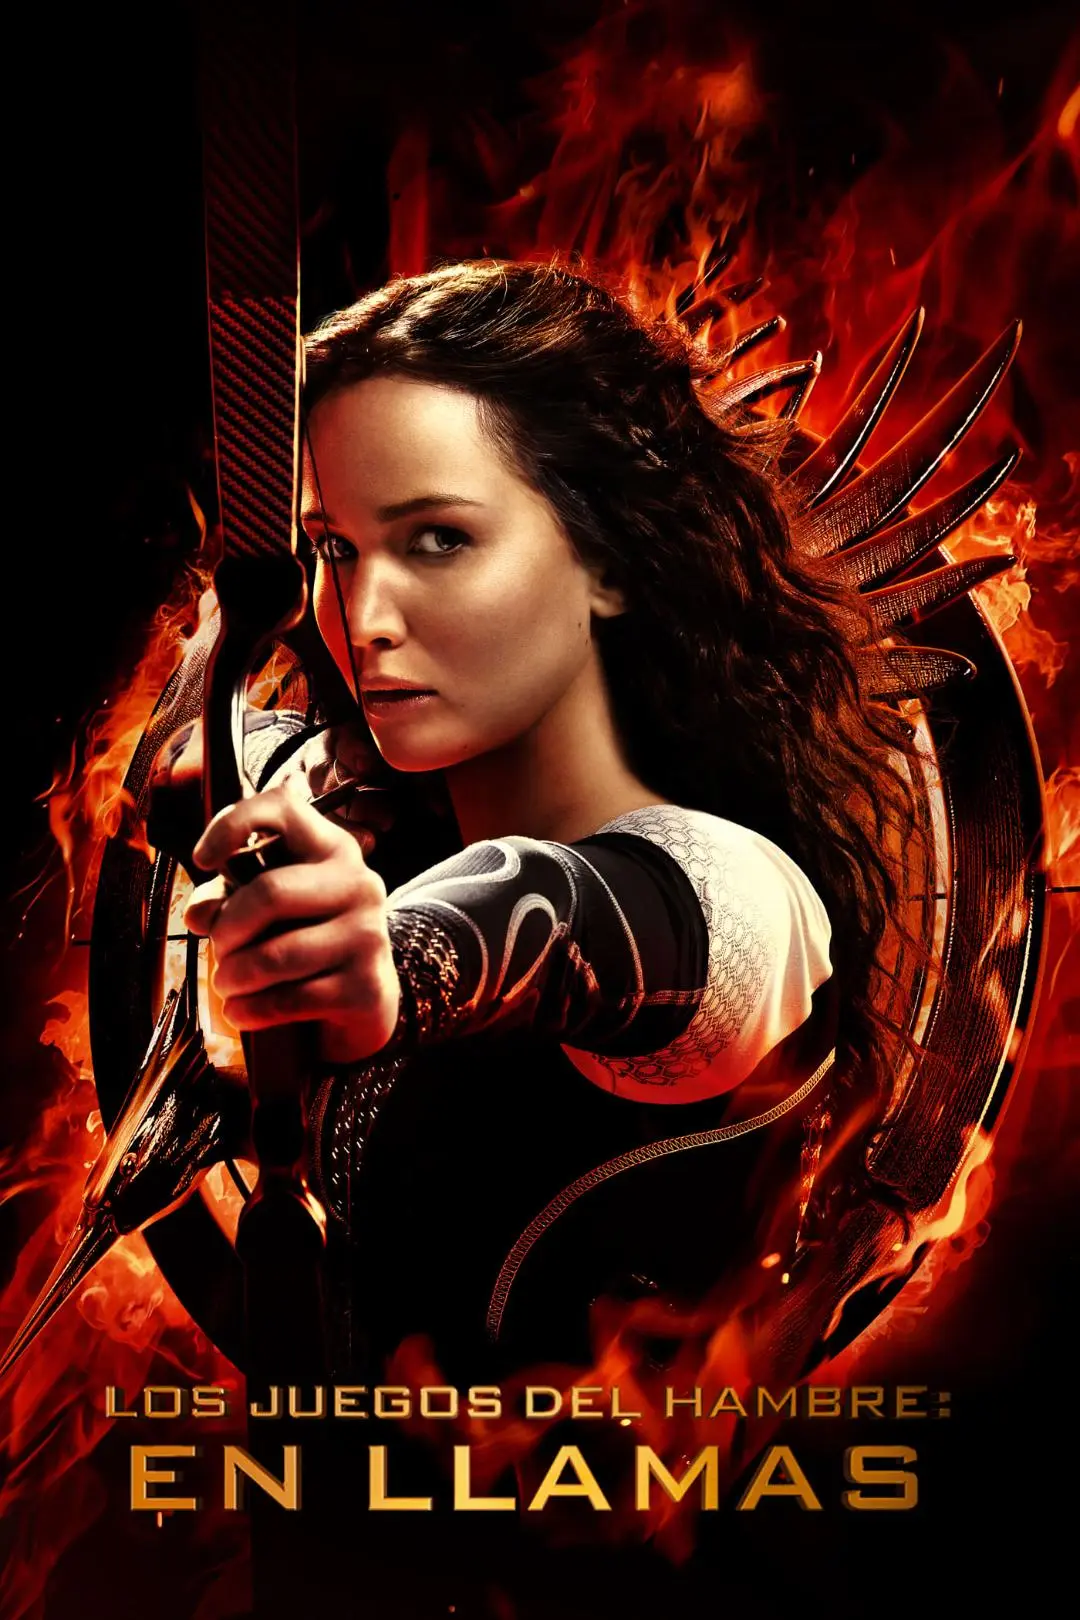 The Hunger Games: Catching Fire_peliplat